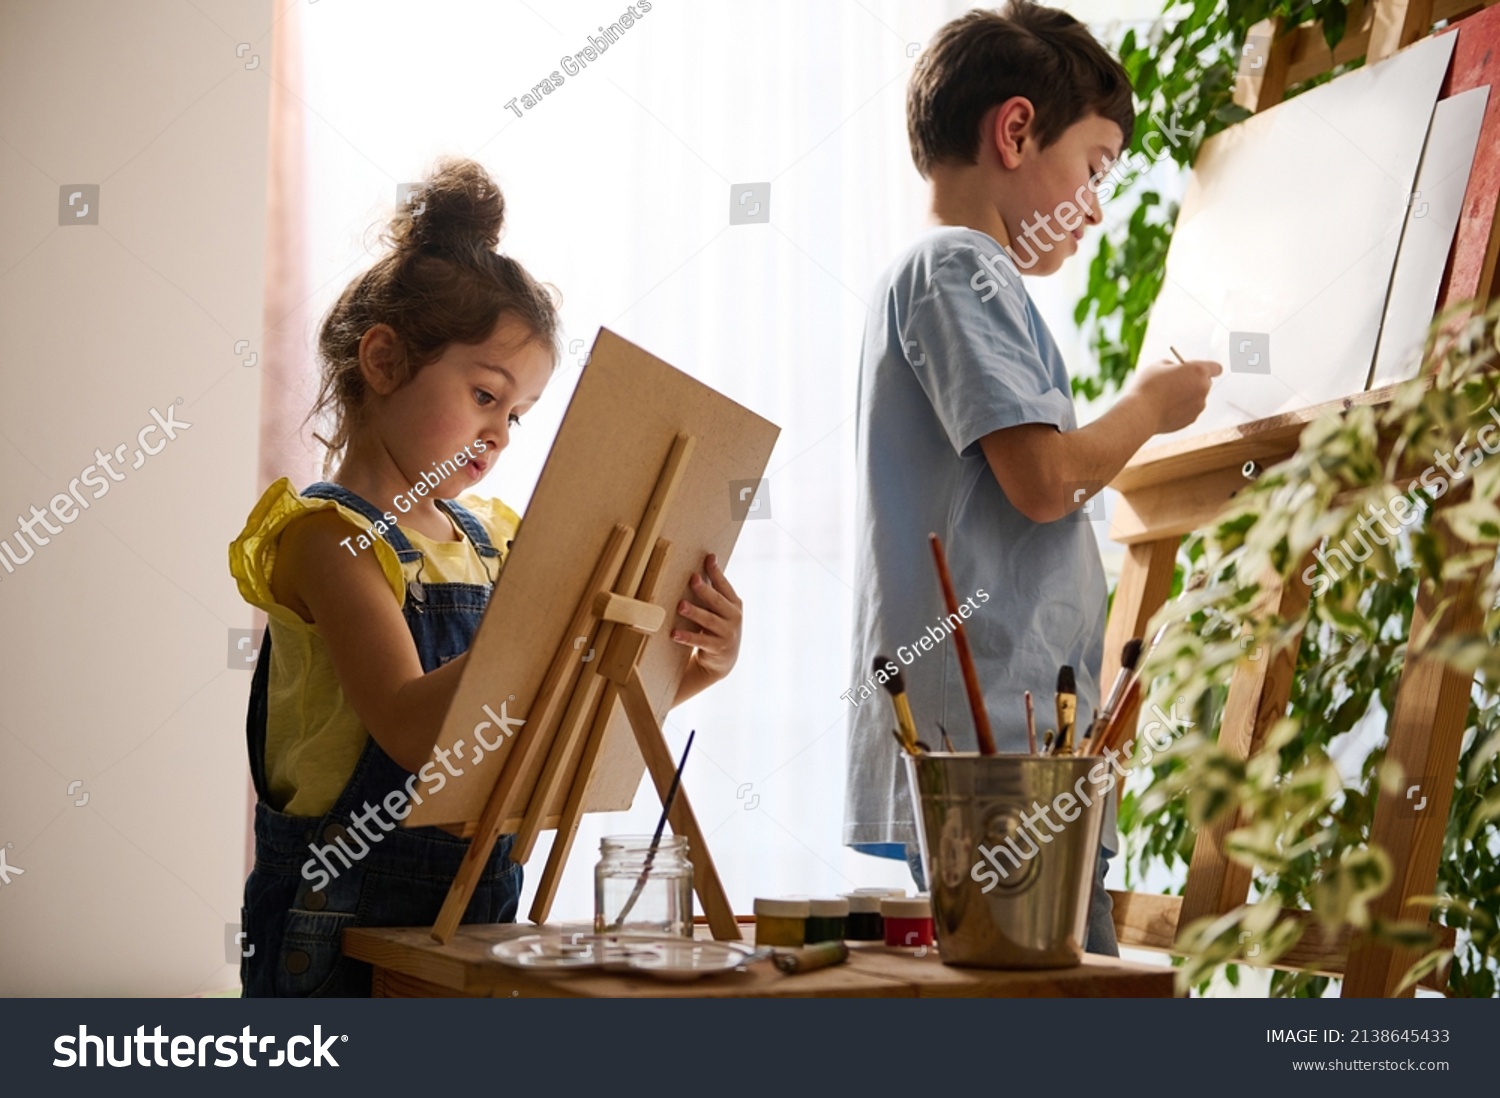 Beautiful smart children, preschool girl schoolboy enjoying art class, drawing, painting images on canvas with oil and watercolor paints. Creativity, education, art, kidsnentertainment, hobby concept #2138645433